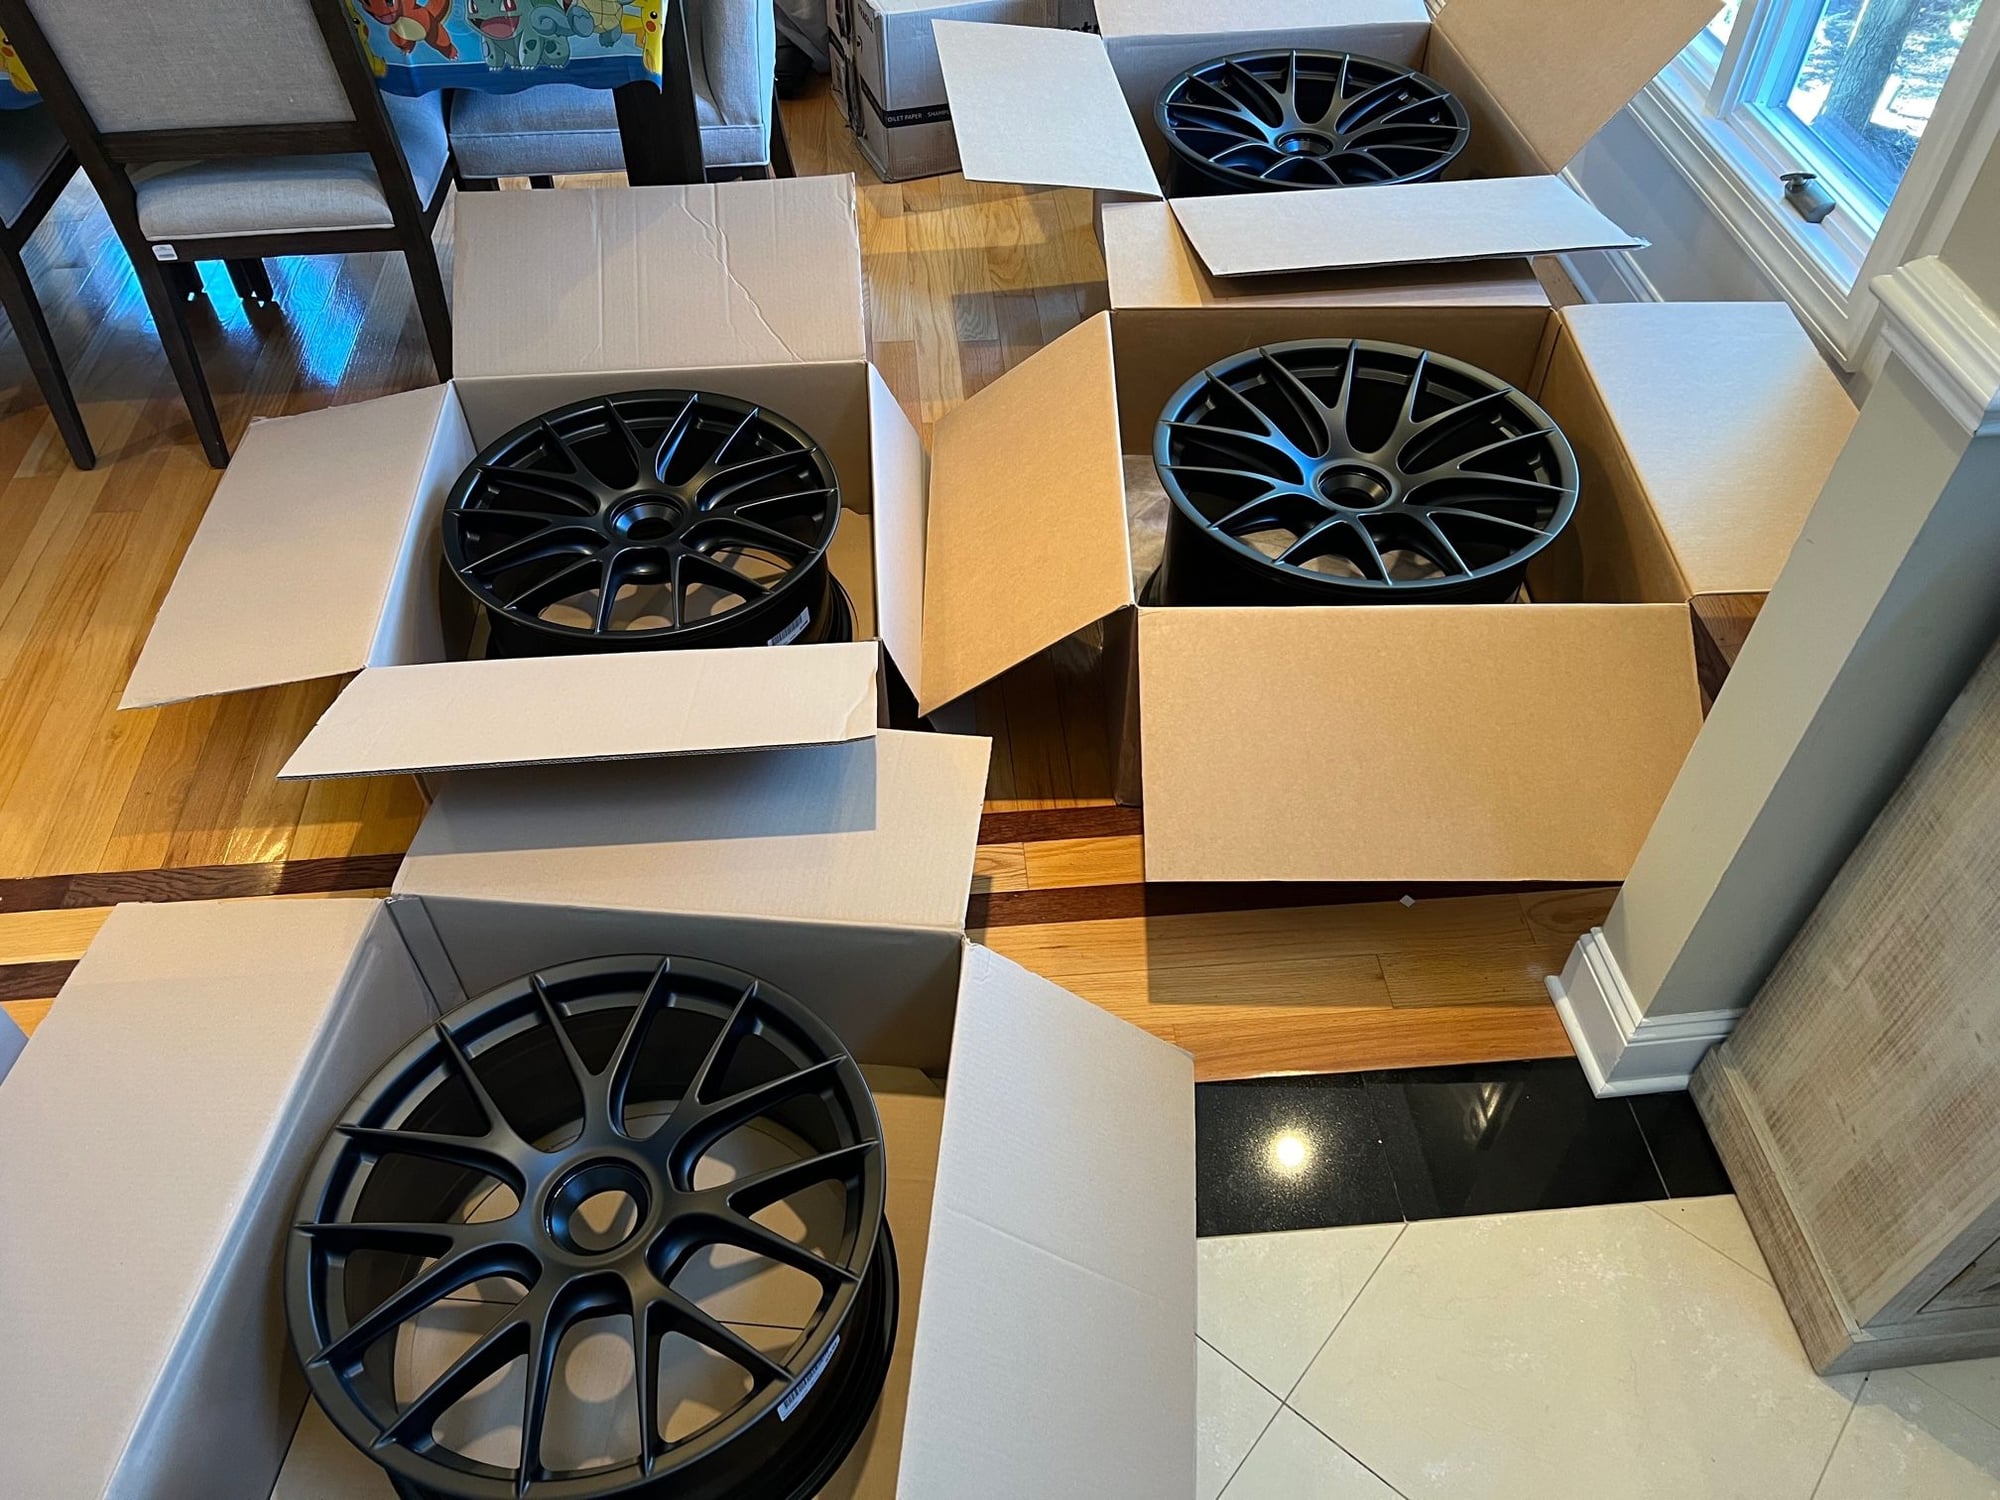 Wheels and Tires/Axles - 20"/21" Staggered Magnesium Wheels for 991 GT3RS & G2RS Weissach Satin Black RE 1746 - New - Short Hills, NJ 7041, United States